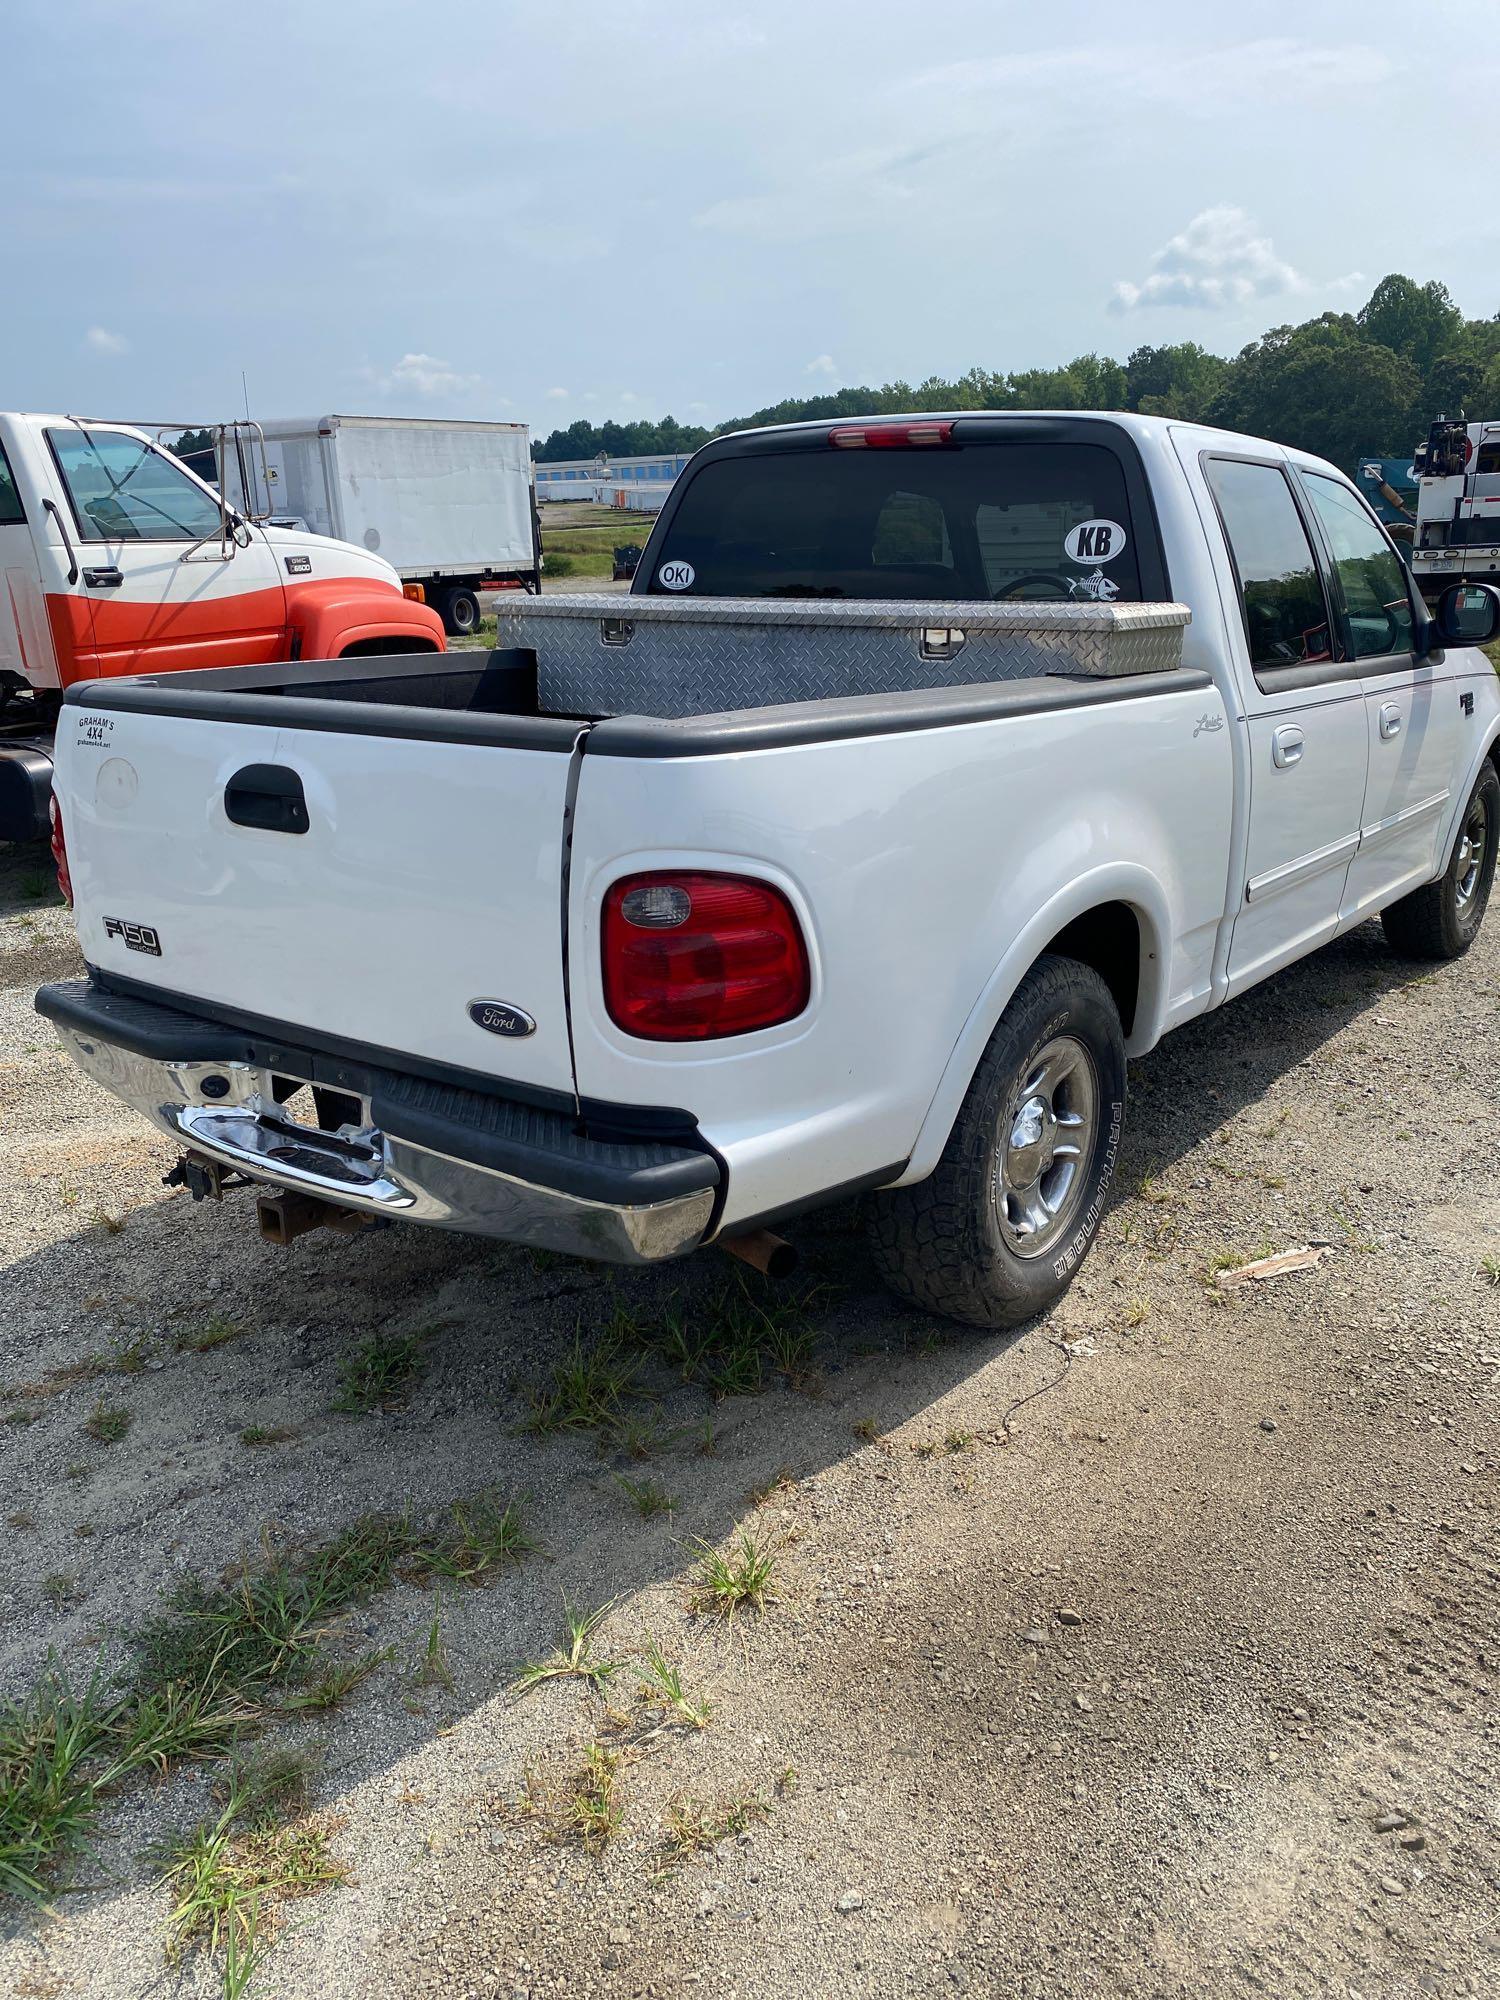 2003 Ford F-150 Crew Cab Pick-up Truck